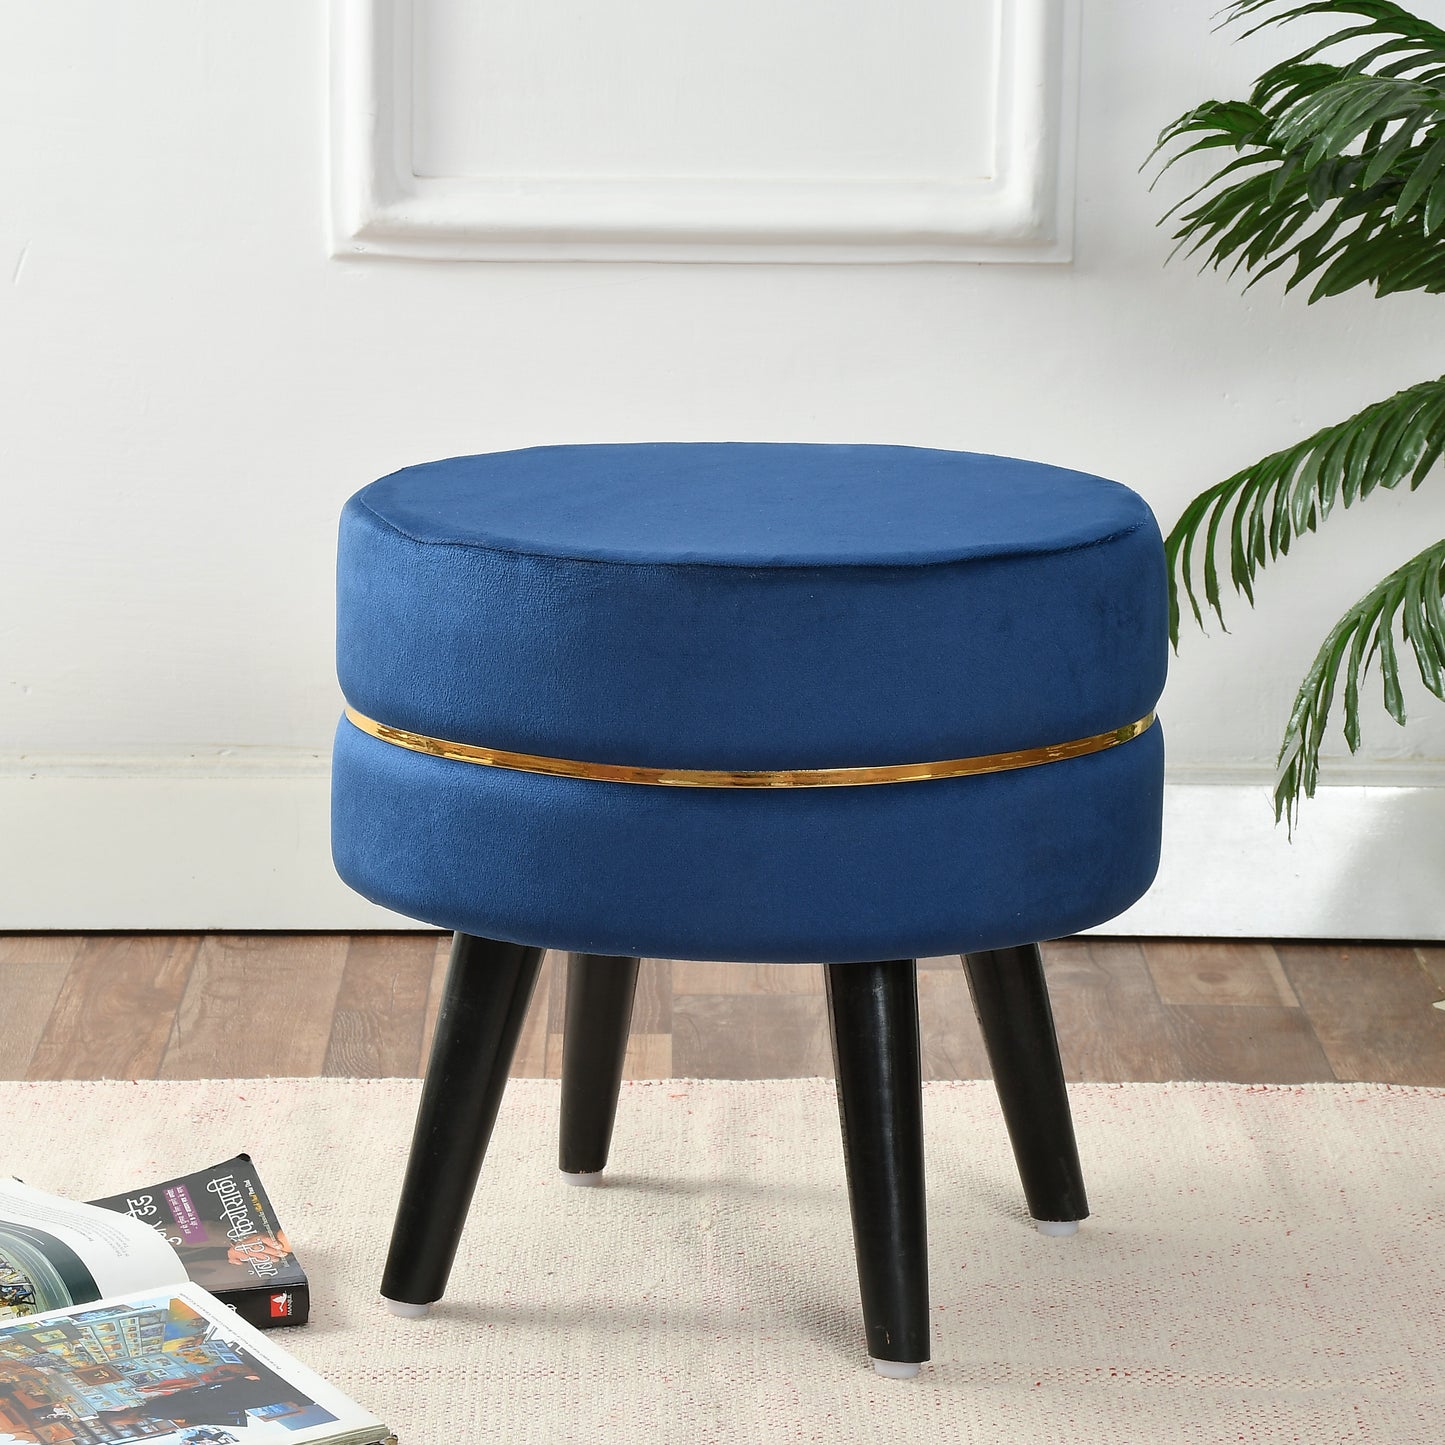 Homeaccex Ottoman Pouffe Puffy Stool, 16inch Height